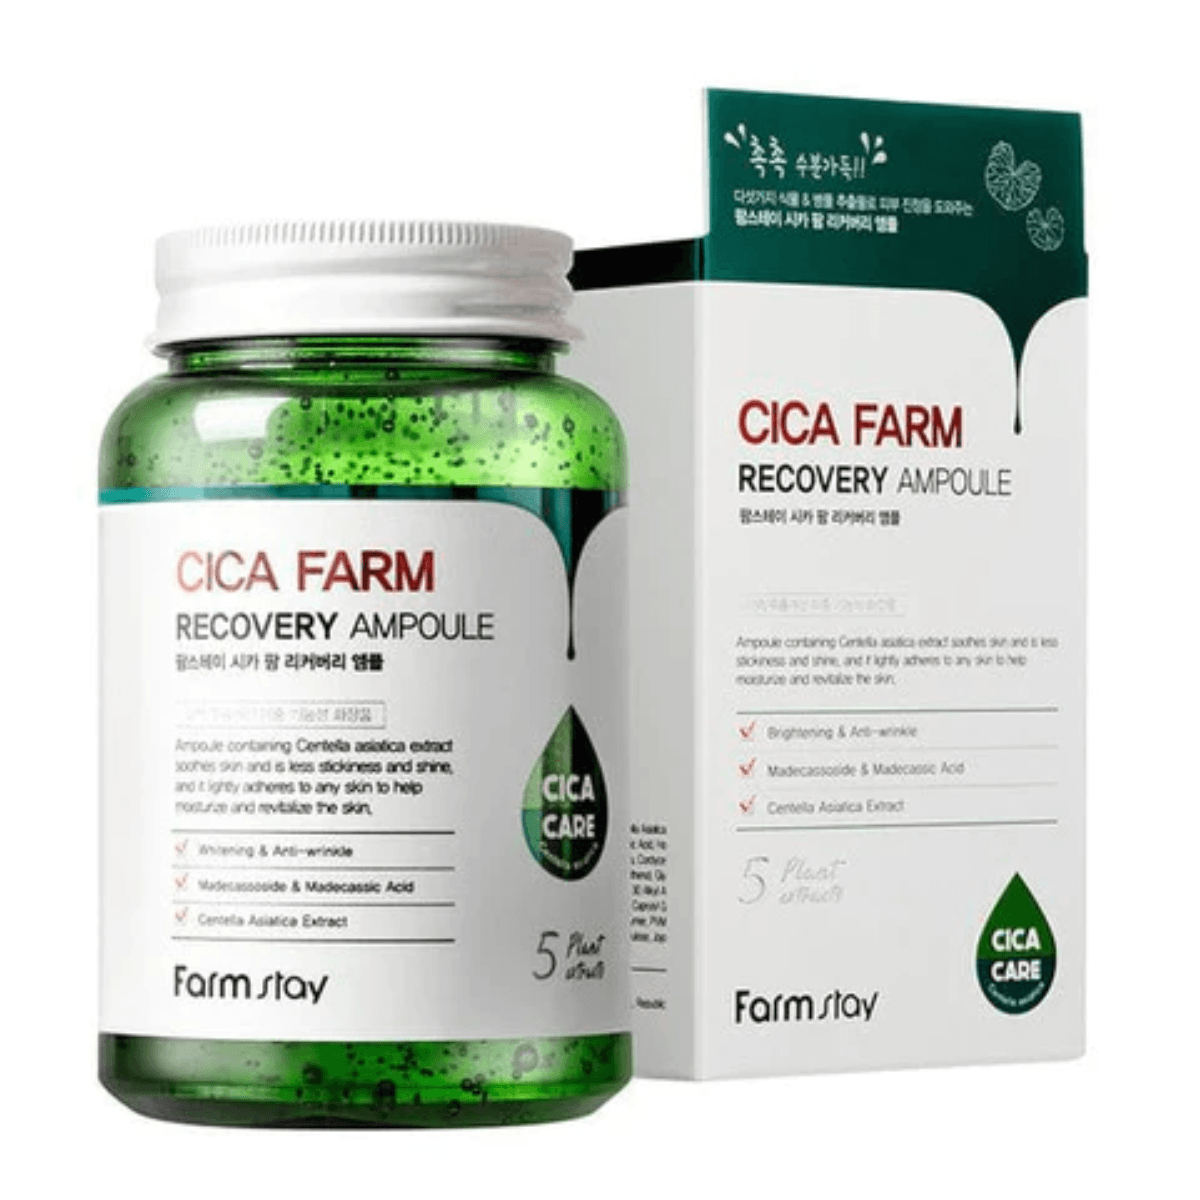 Farmstay Cica Farm Recovery Ampoule: Soothes, brightens, and deeply moisturizes skin with Centella Asiatica extract.